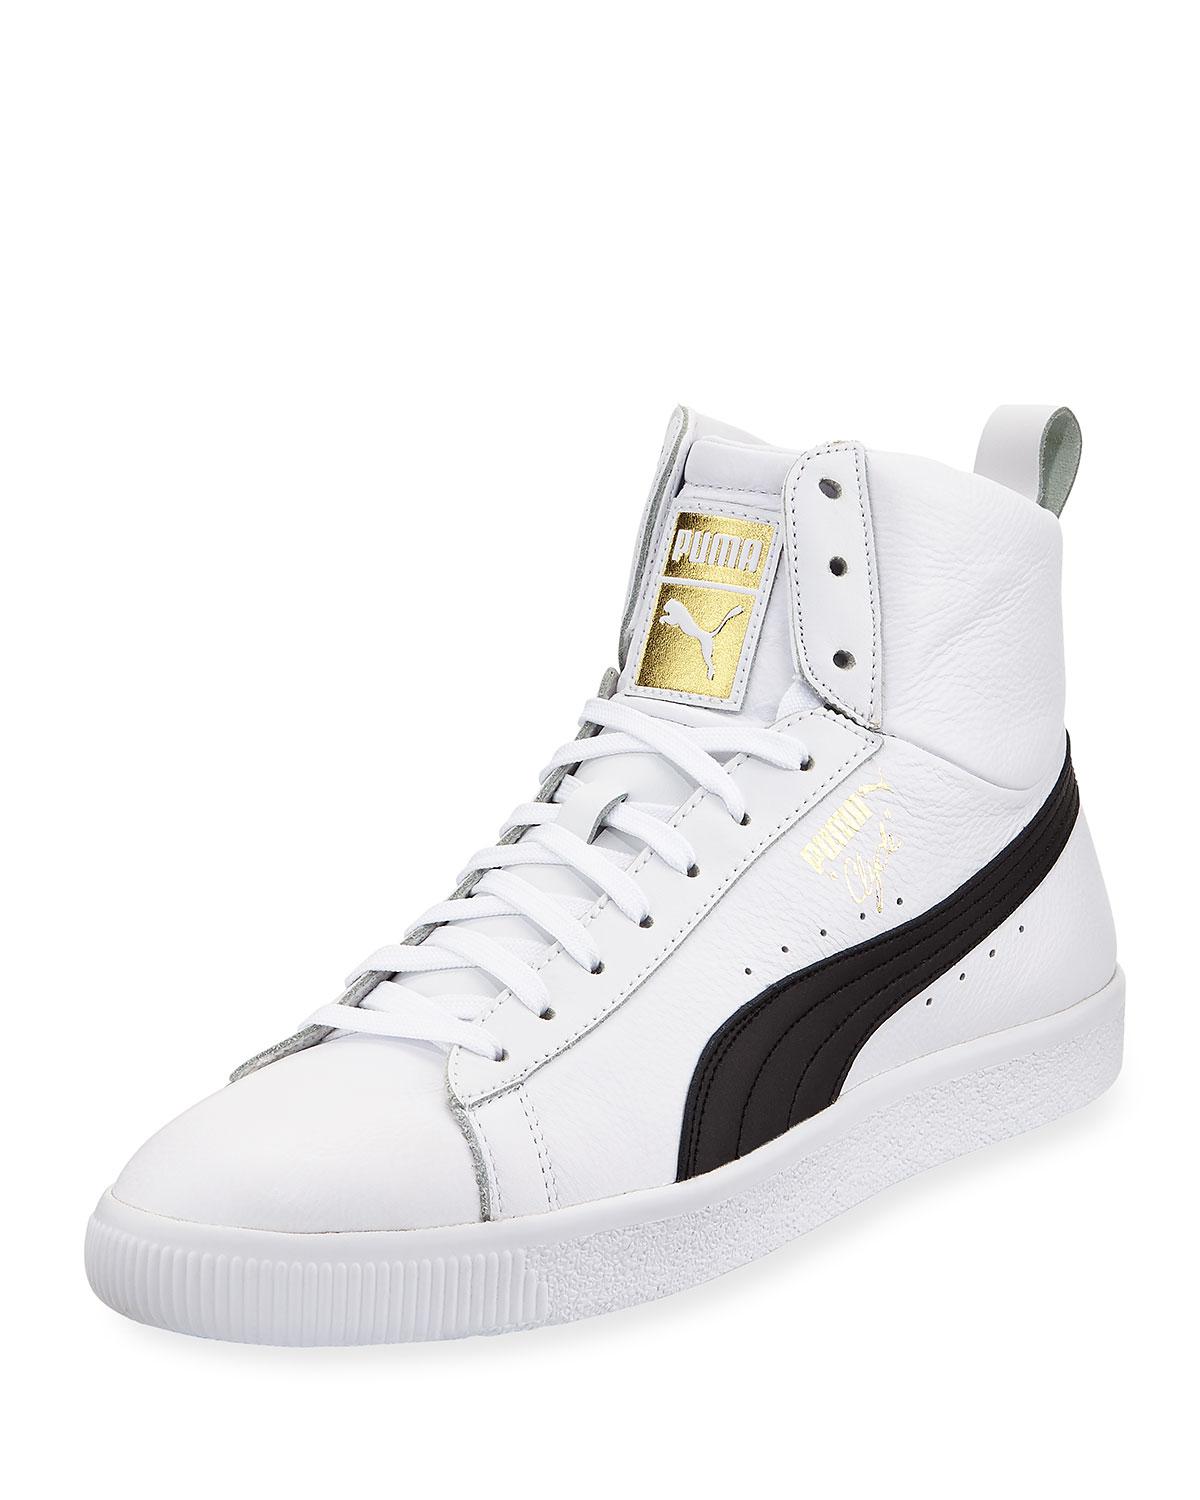 PUMA Men's Clyde Mid Core High-top Leather Sneakers in White for Men - Lyst